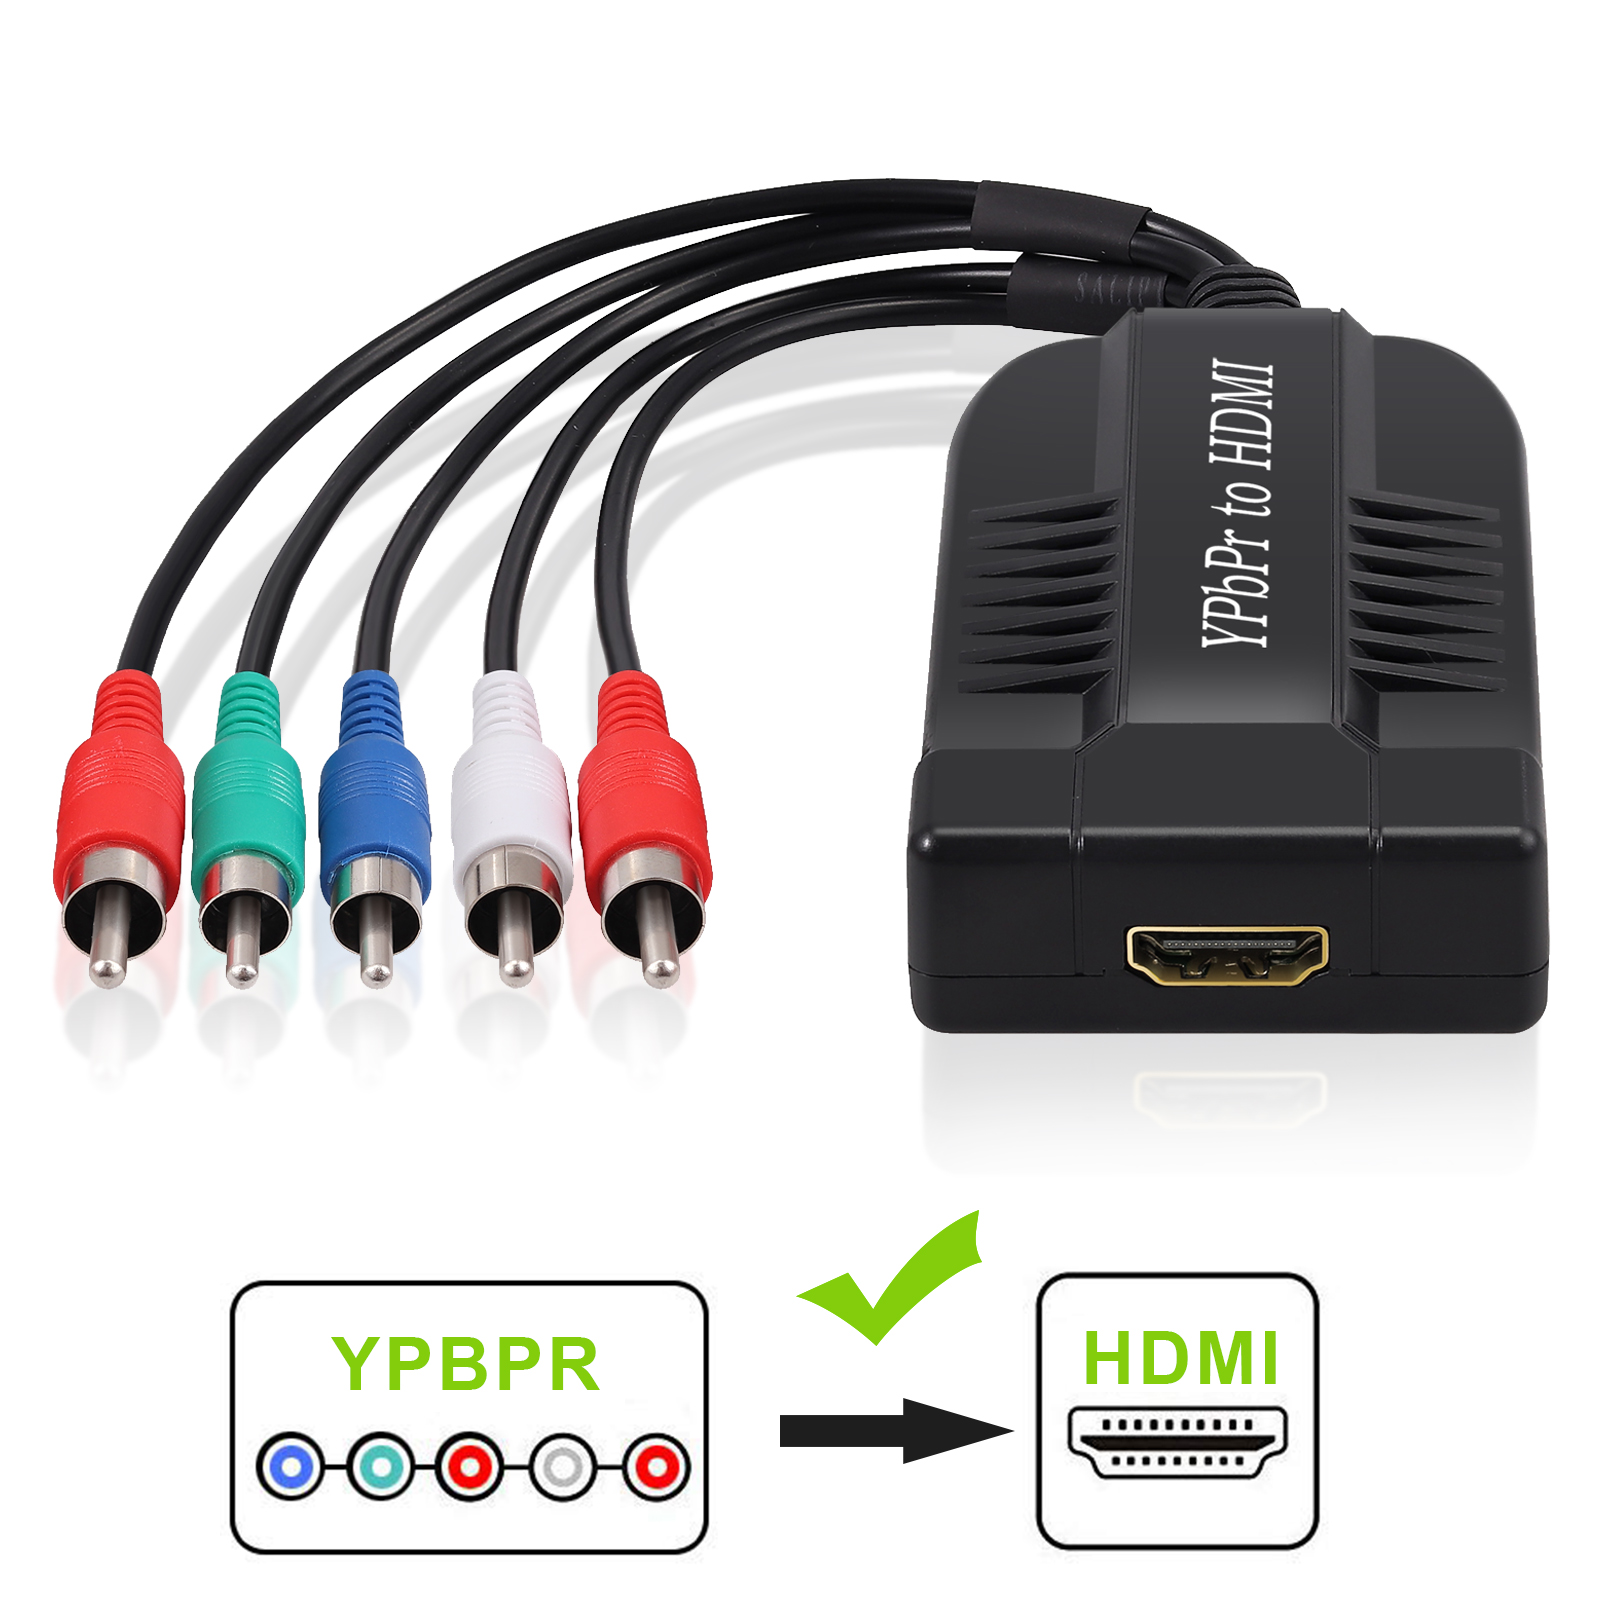 Male YPBPR RGB Component Video Audio - HDMI Converter 1080P for PS3 ...